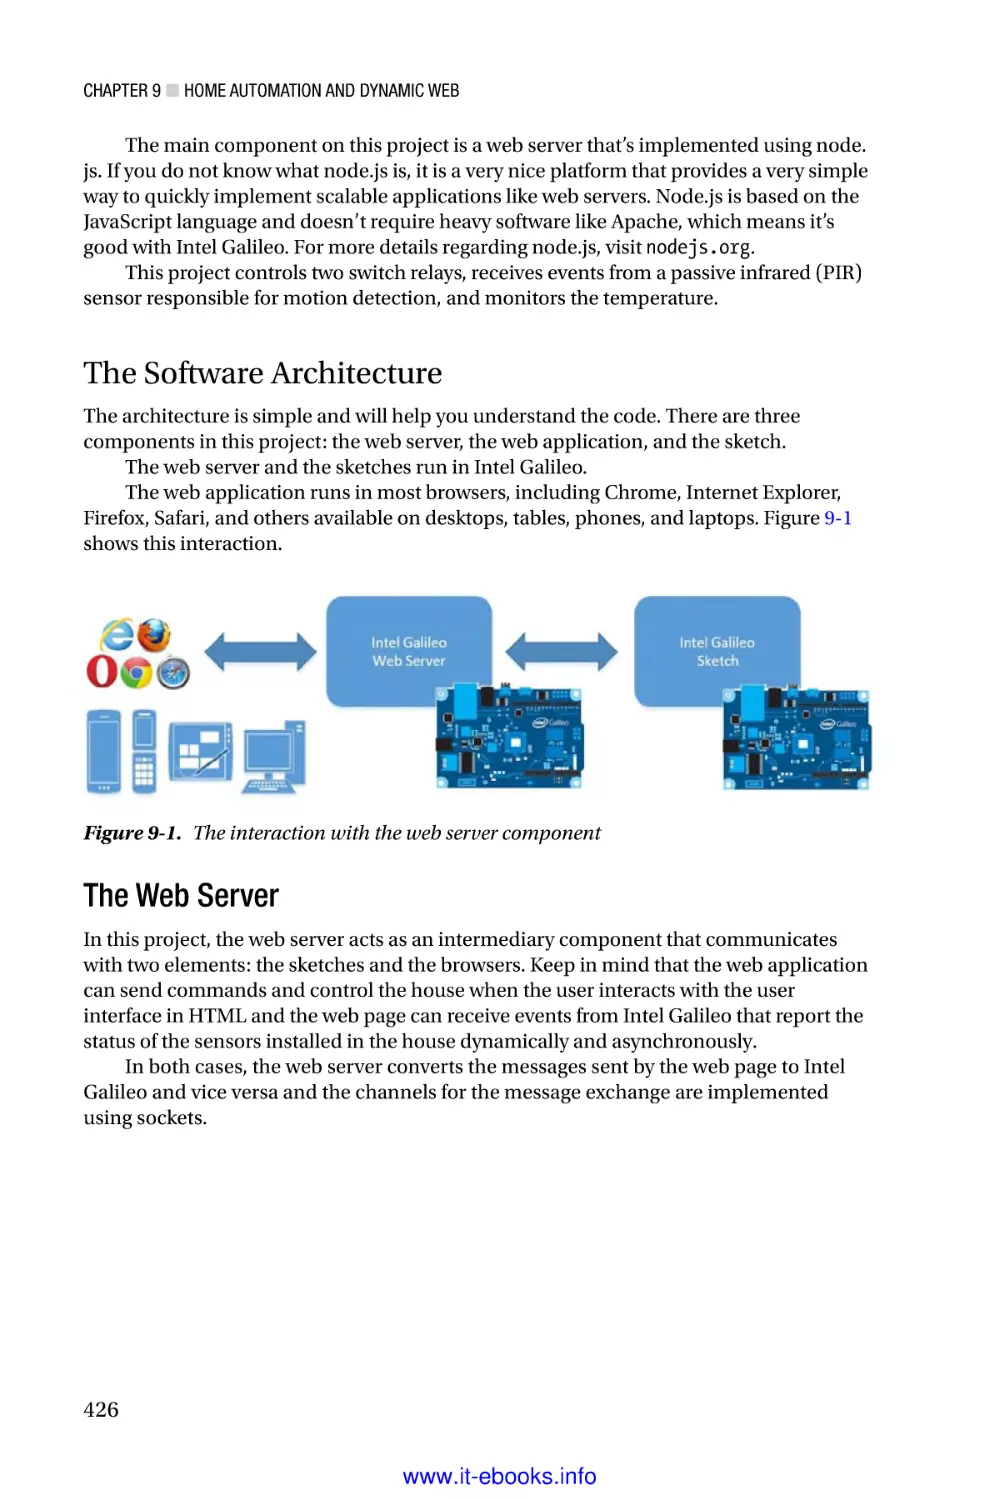 The Software Architecture
The Web Server